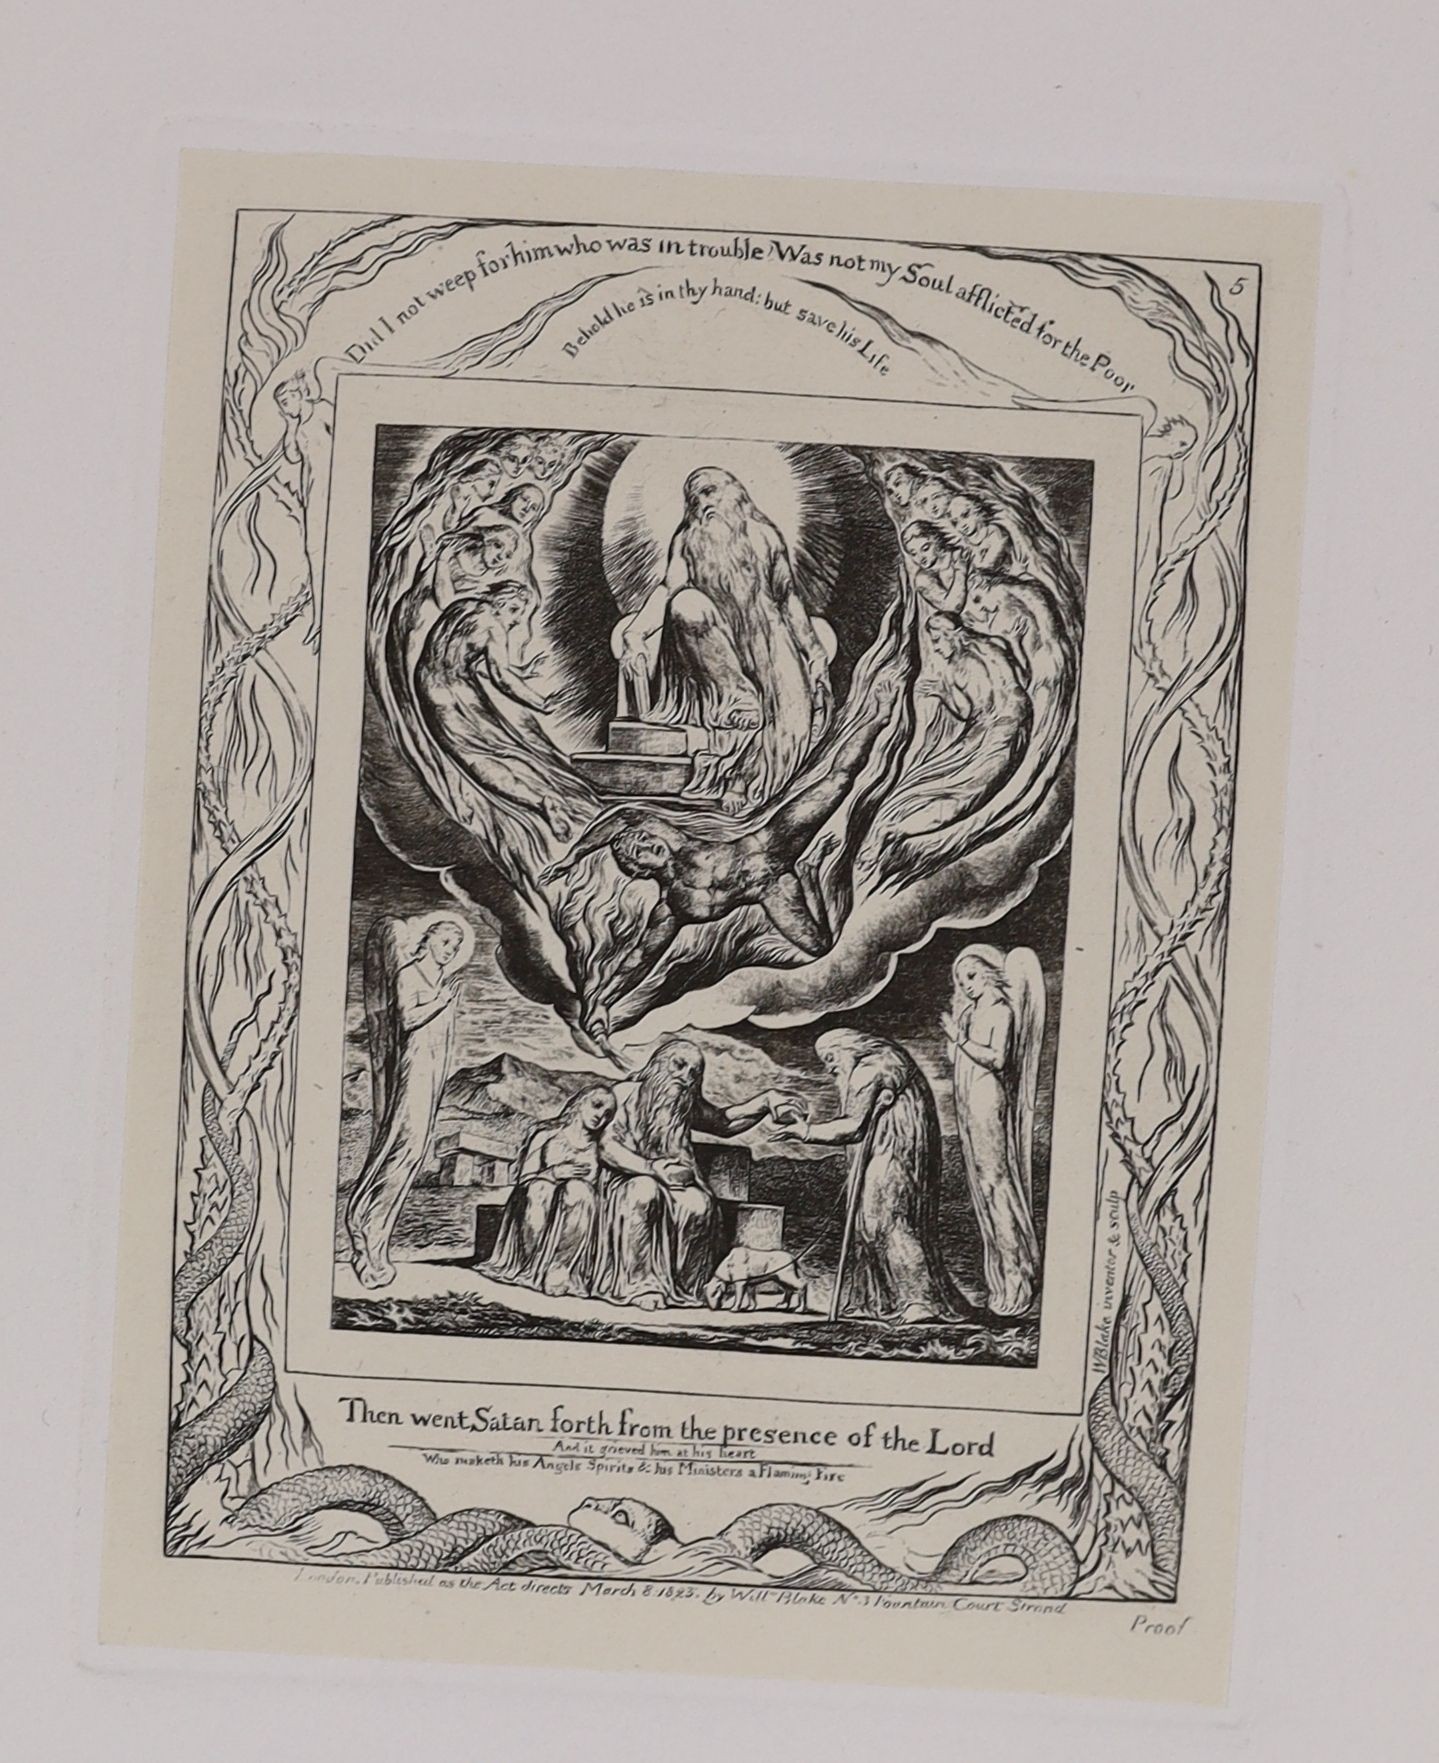 William Blake - Book of Job, 21 facsimile plates, one of 100, half cloth folio, plates 18 x 13cms., 1903. Bookplate of Bache Matthews (1876-1948) Birmingham Repertory theatre manager and author of A History of the Birmin